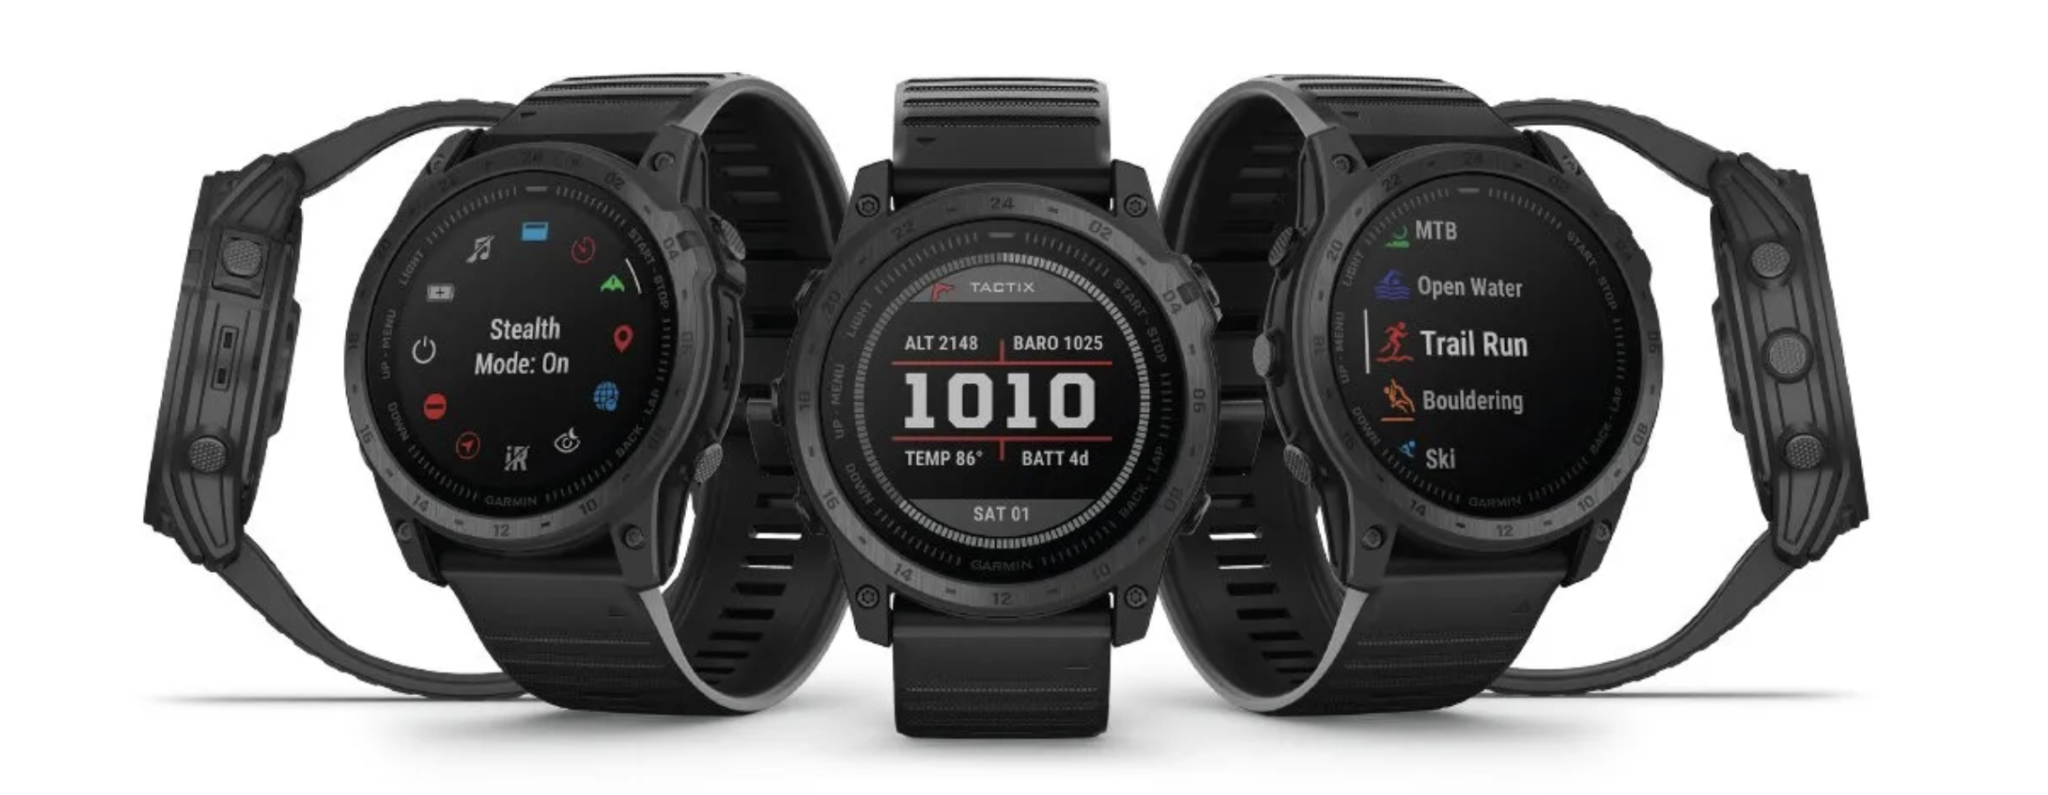 Garmin Released Two New Garmin Watches Expensive and Awesome!